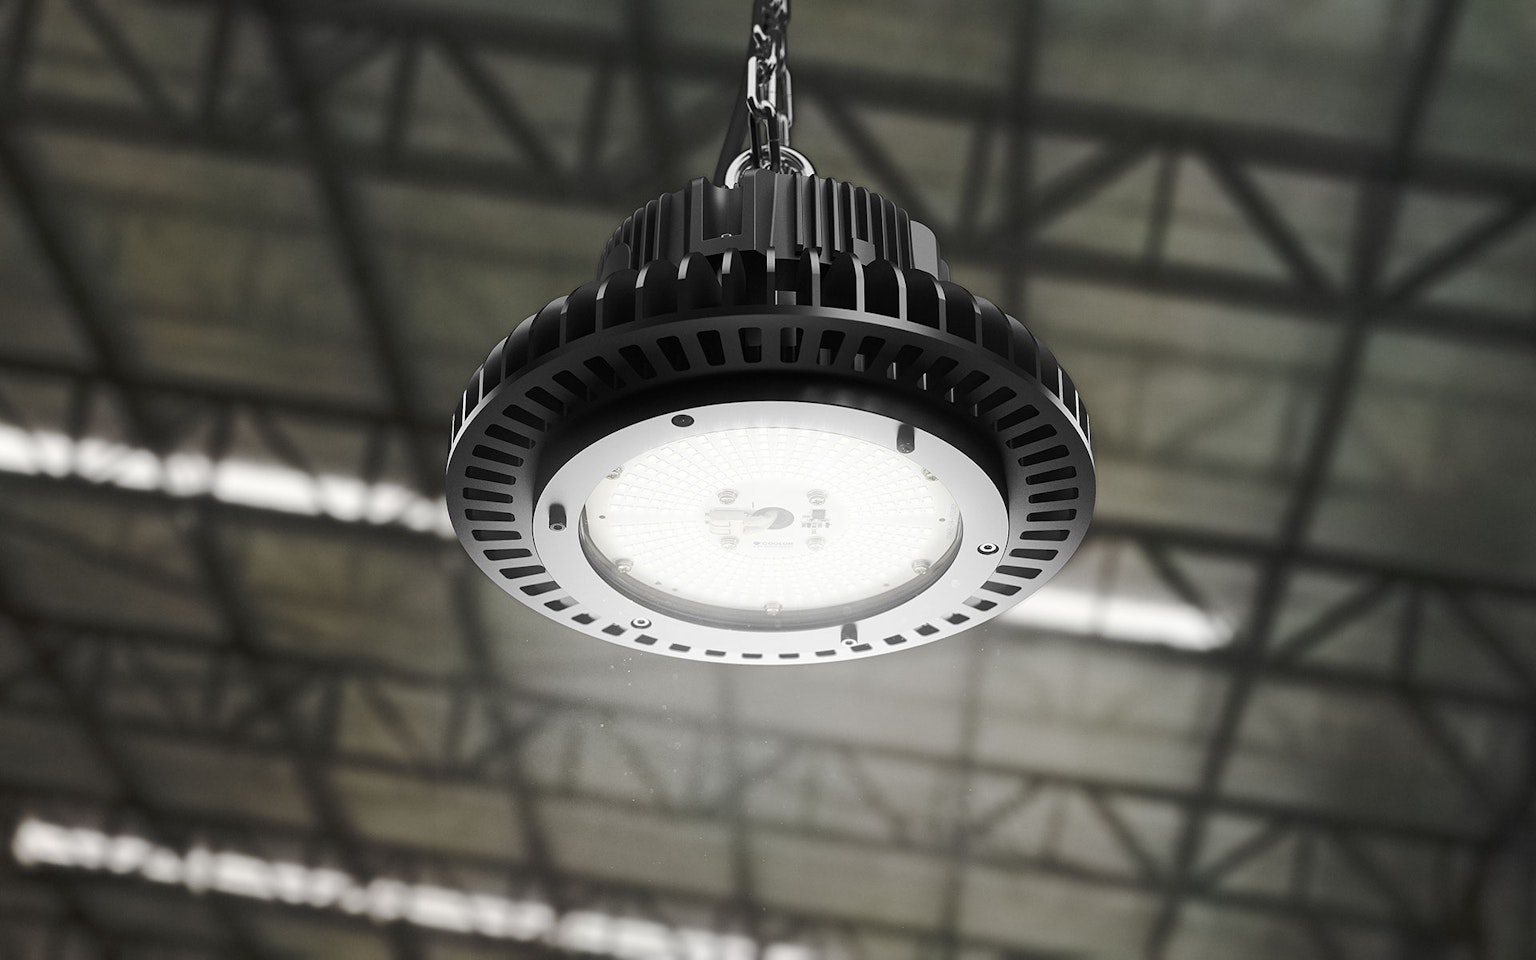 AZIZ LIGHT industrial LED High Bay luminaire in application,installed in a warehouse